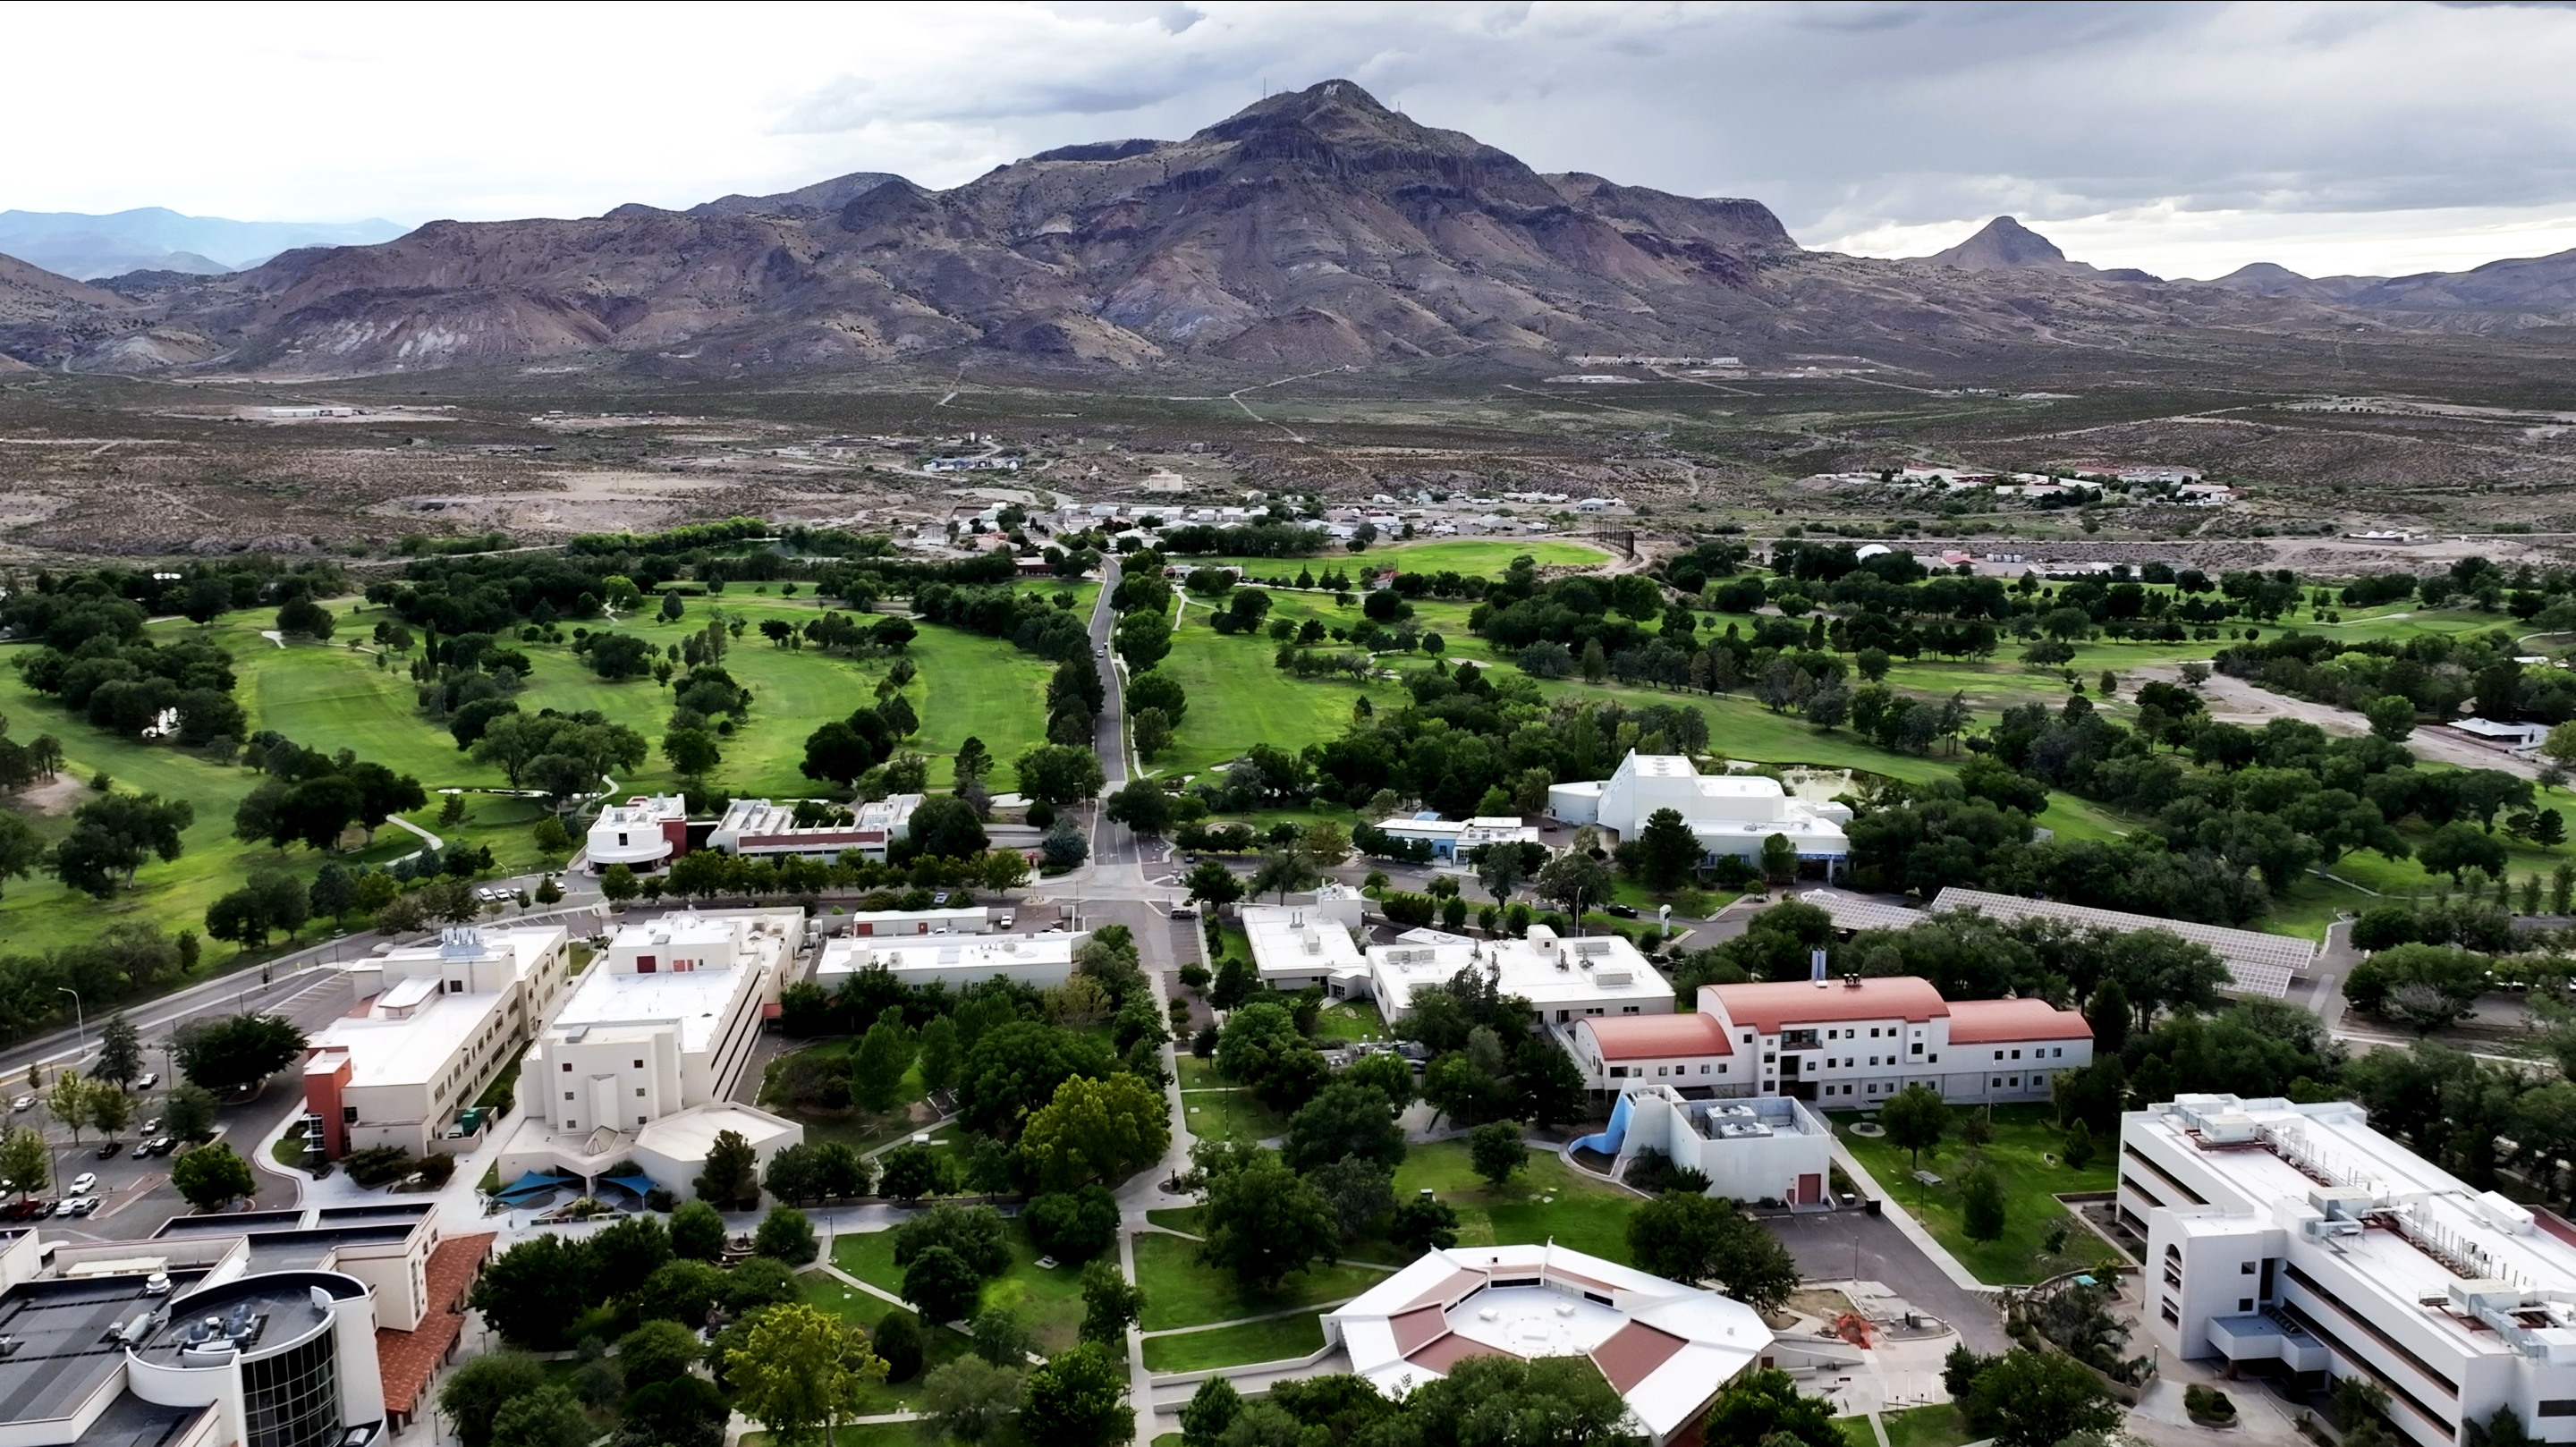 NMT Campus with M Mountain in background